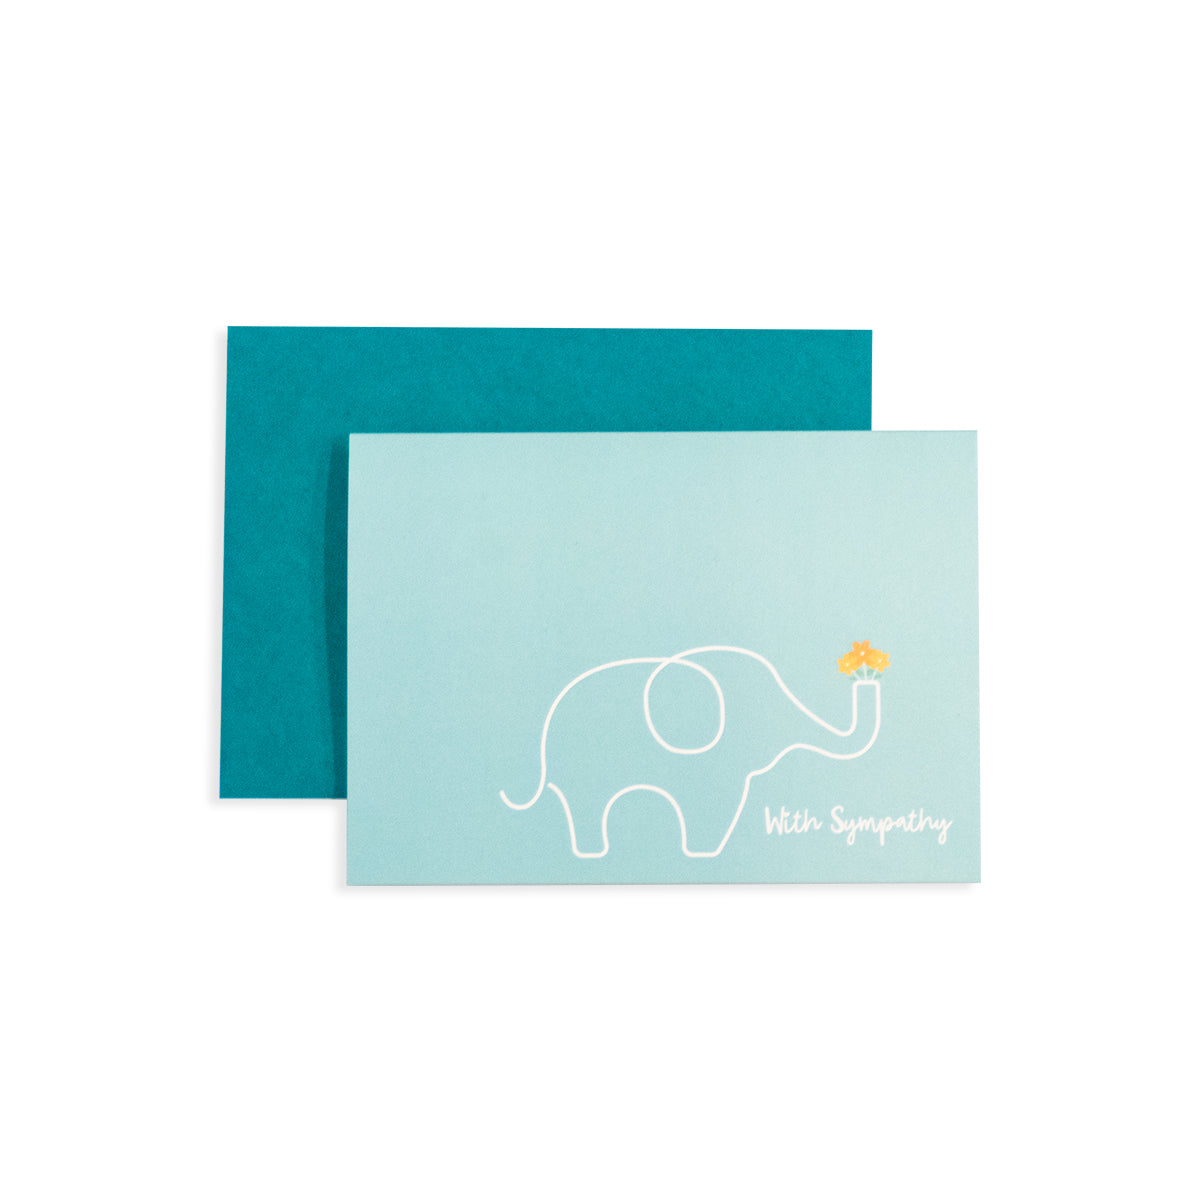 4 1/2" x 6 1/4" blue with sympathy card featuring line art elephant illustration with flowers coming out of the trunk